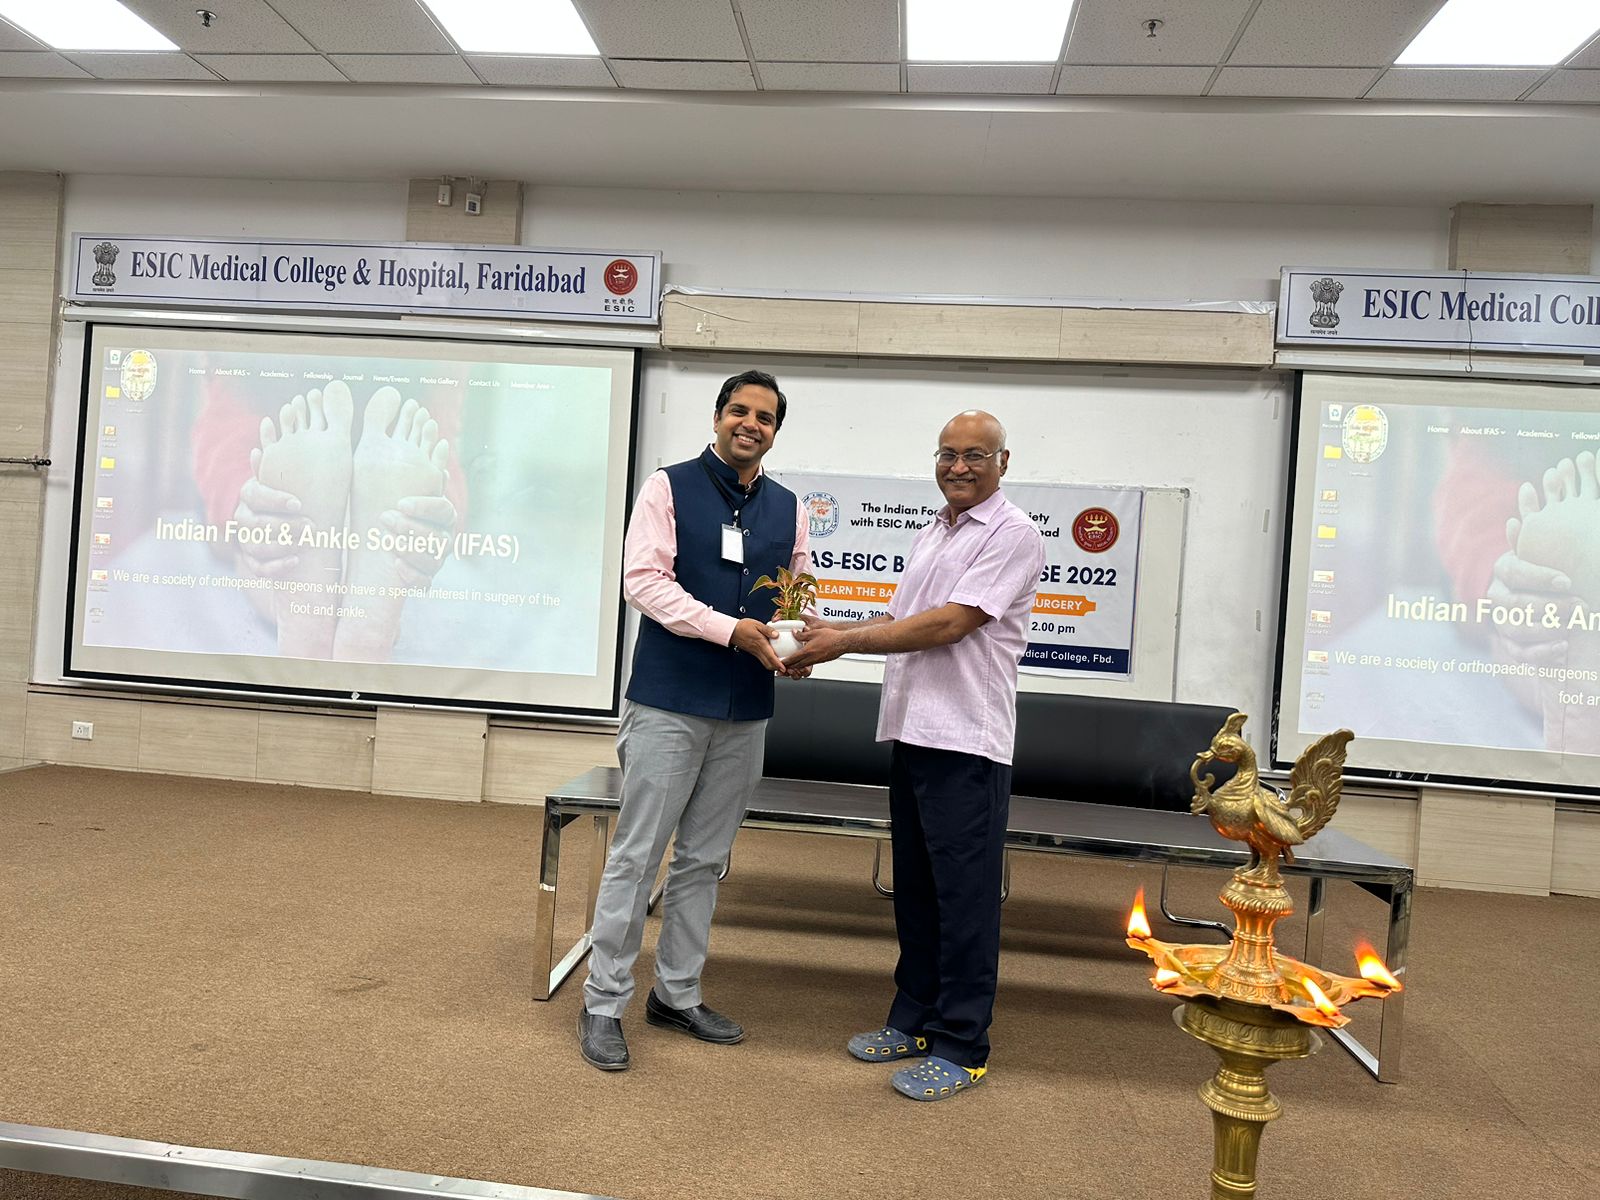 Indian Foot and Ankle Society - IFAS Basic Course 2022